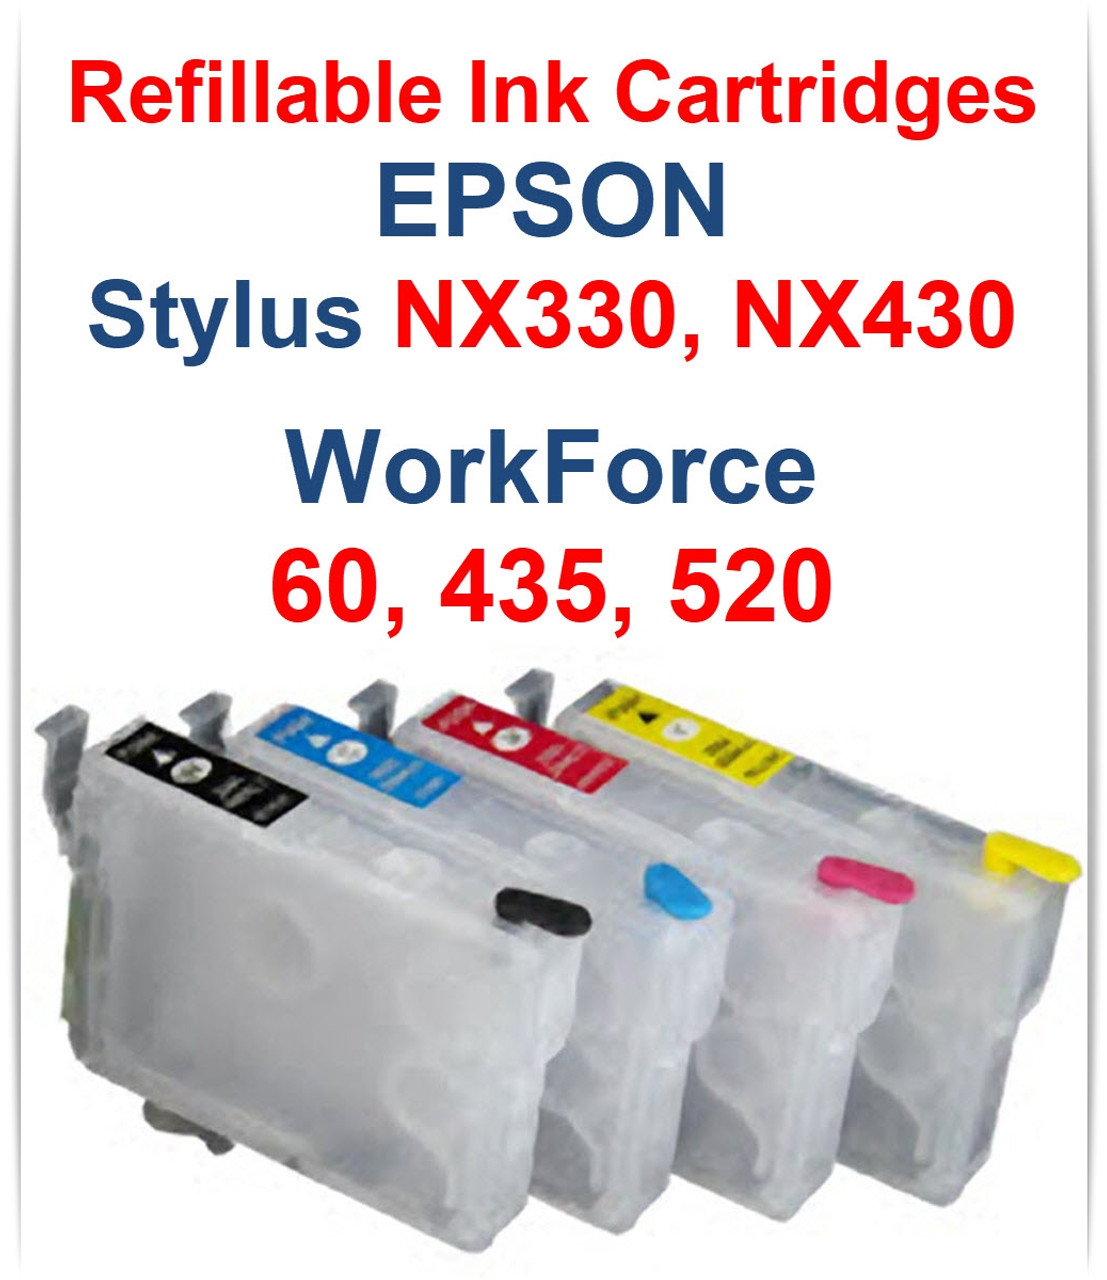 4 Refillable Ink Cartridges for Epson WorkForce 60 435 520, Epson Stylus NX330 NX430 Printers
Package Includes: 1 T126120 Black, 1 T126220 Cyan, 1 T126320 Magenta, 1 T126420 Yellow empty Refillable ink Cartridges, 4 Syringes for filling